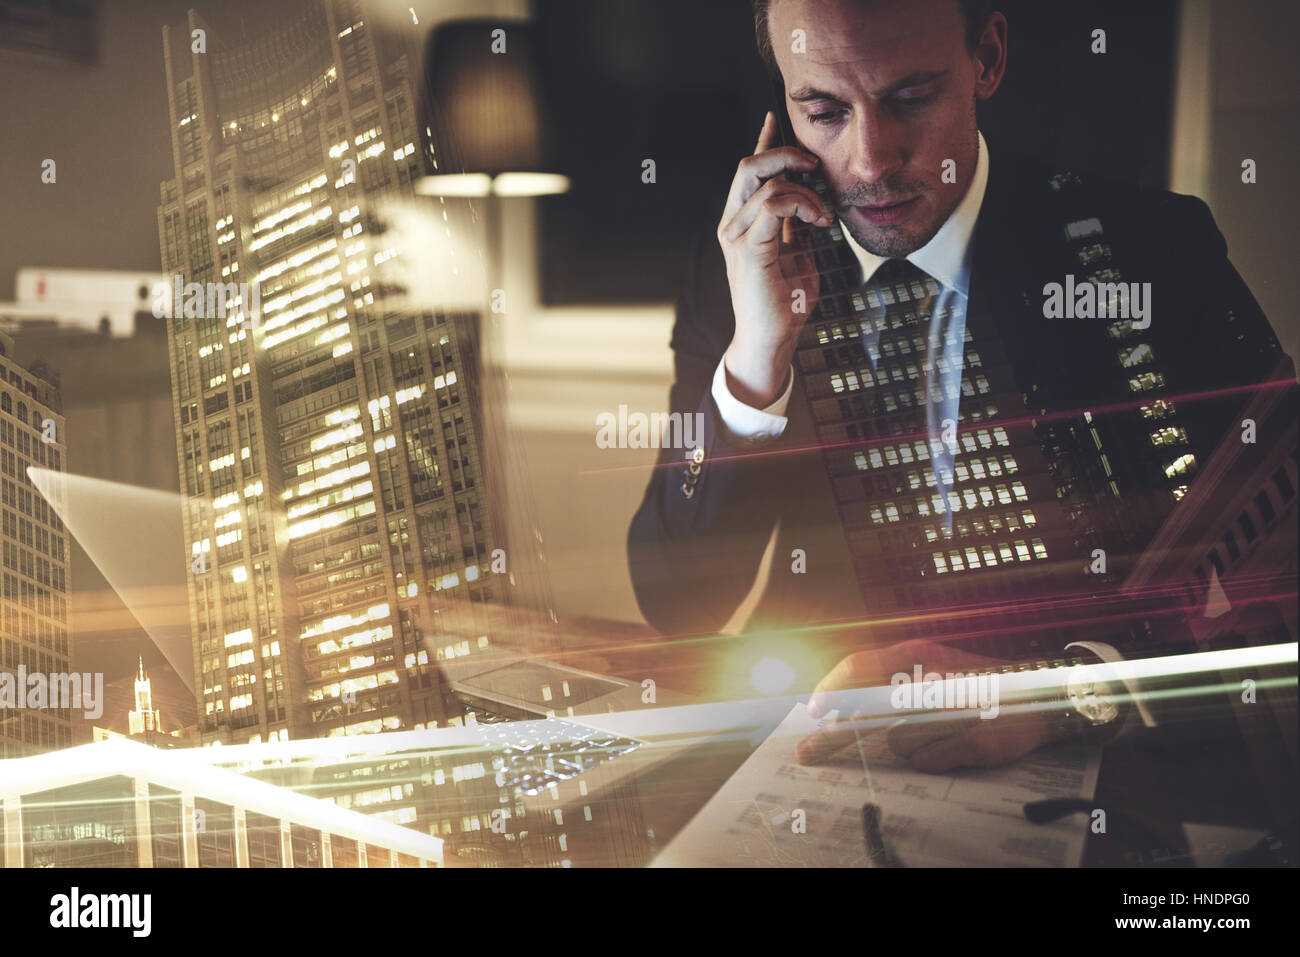 Business man speaking on the phone while sitting at his desk with documents Stock Photo